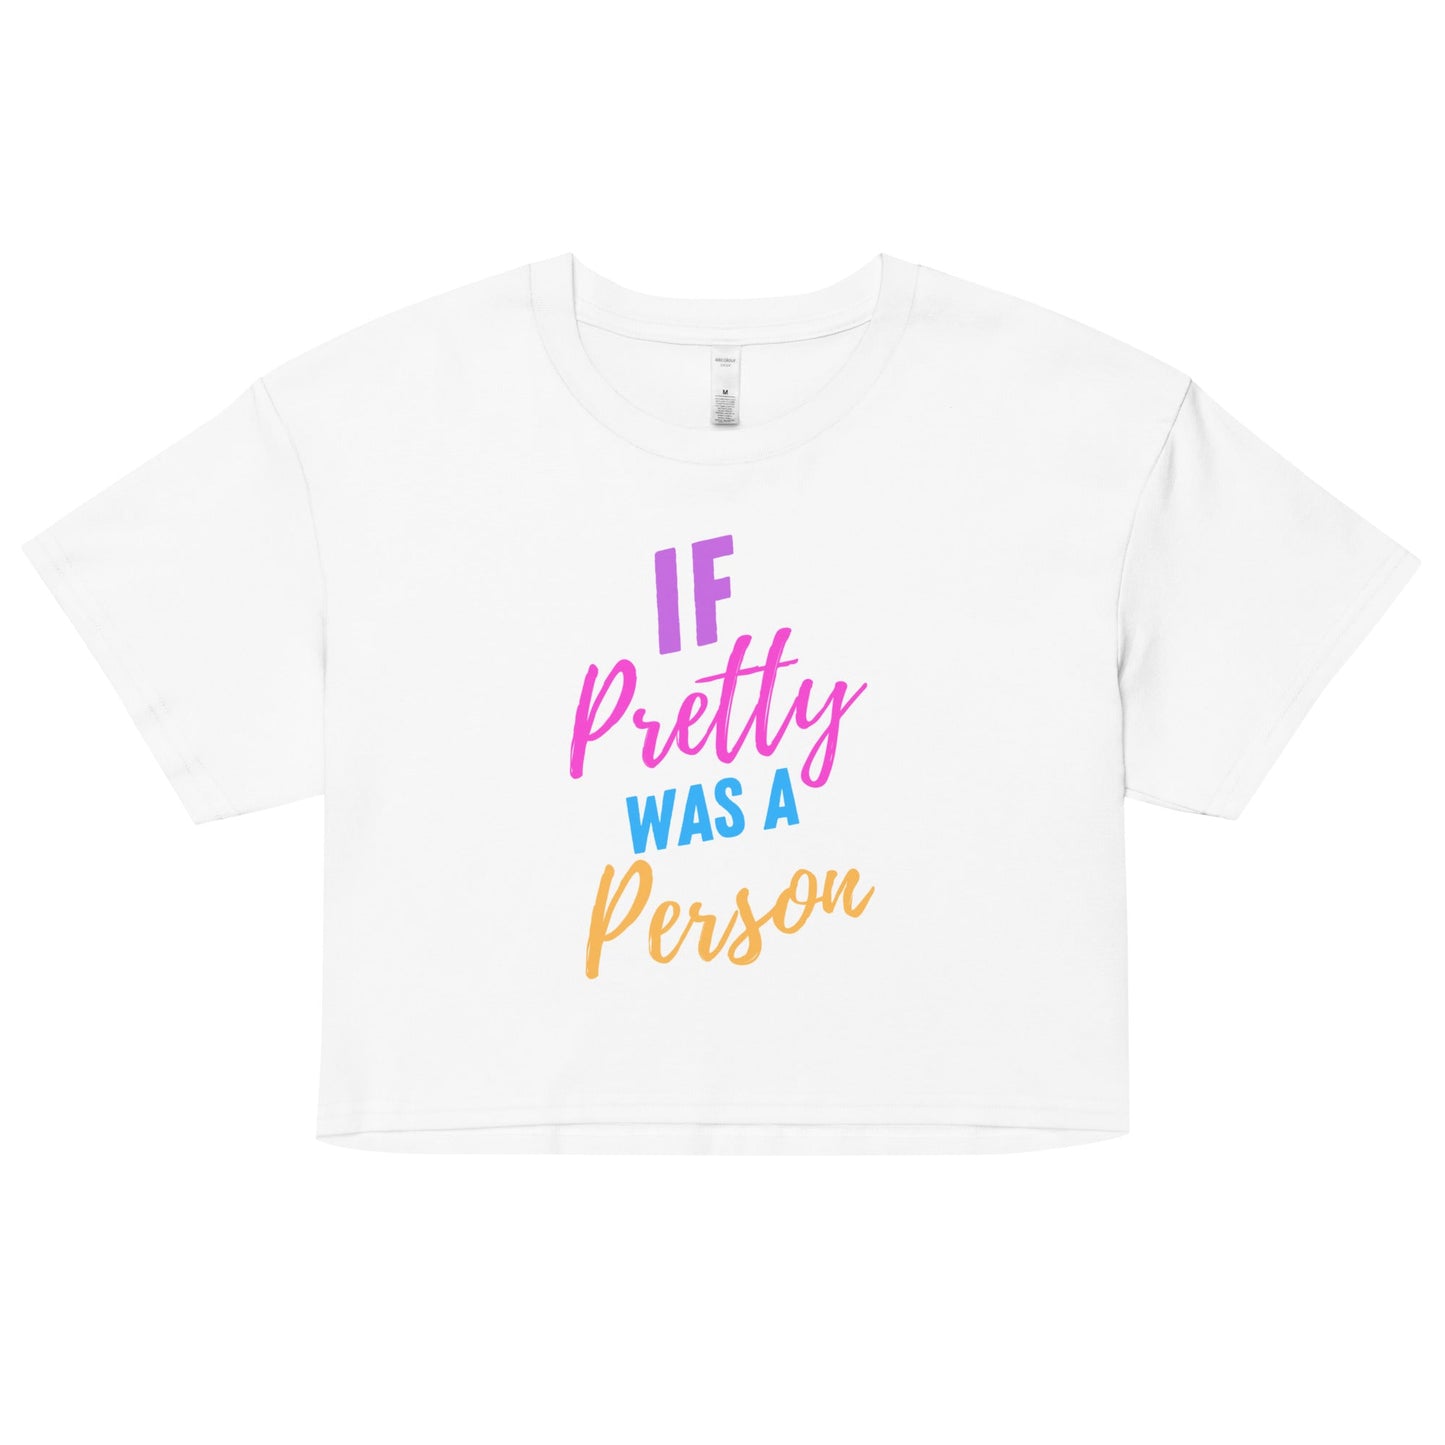 If Pretty Was a Person Women’s crop top - Catch This Tea Shirts